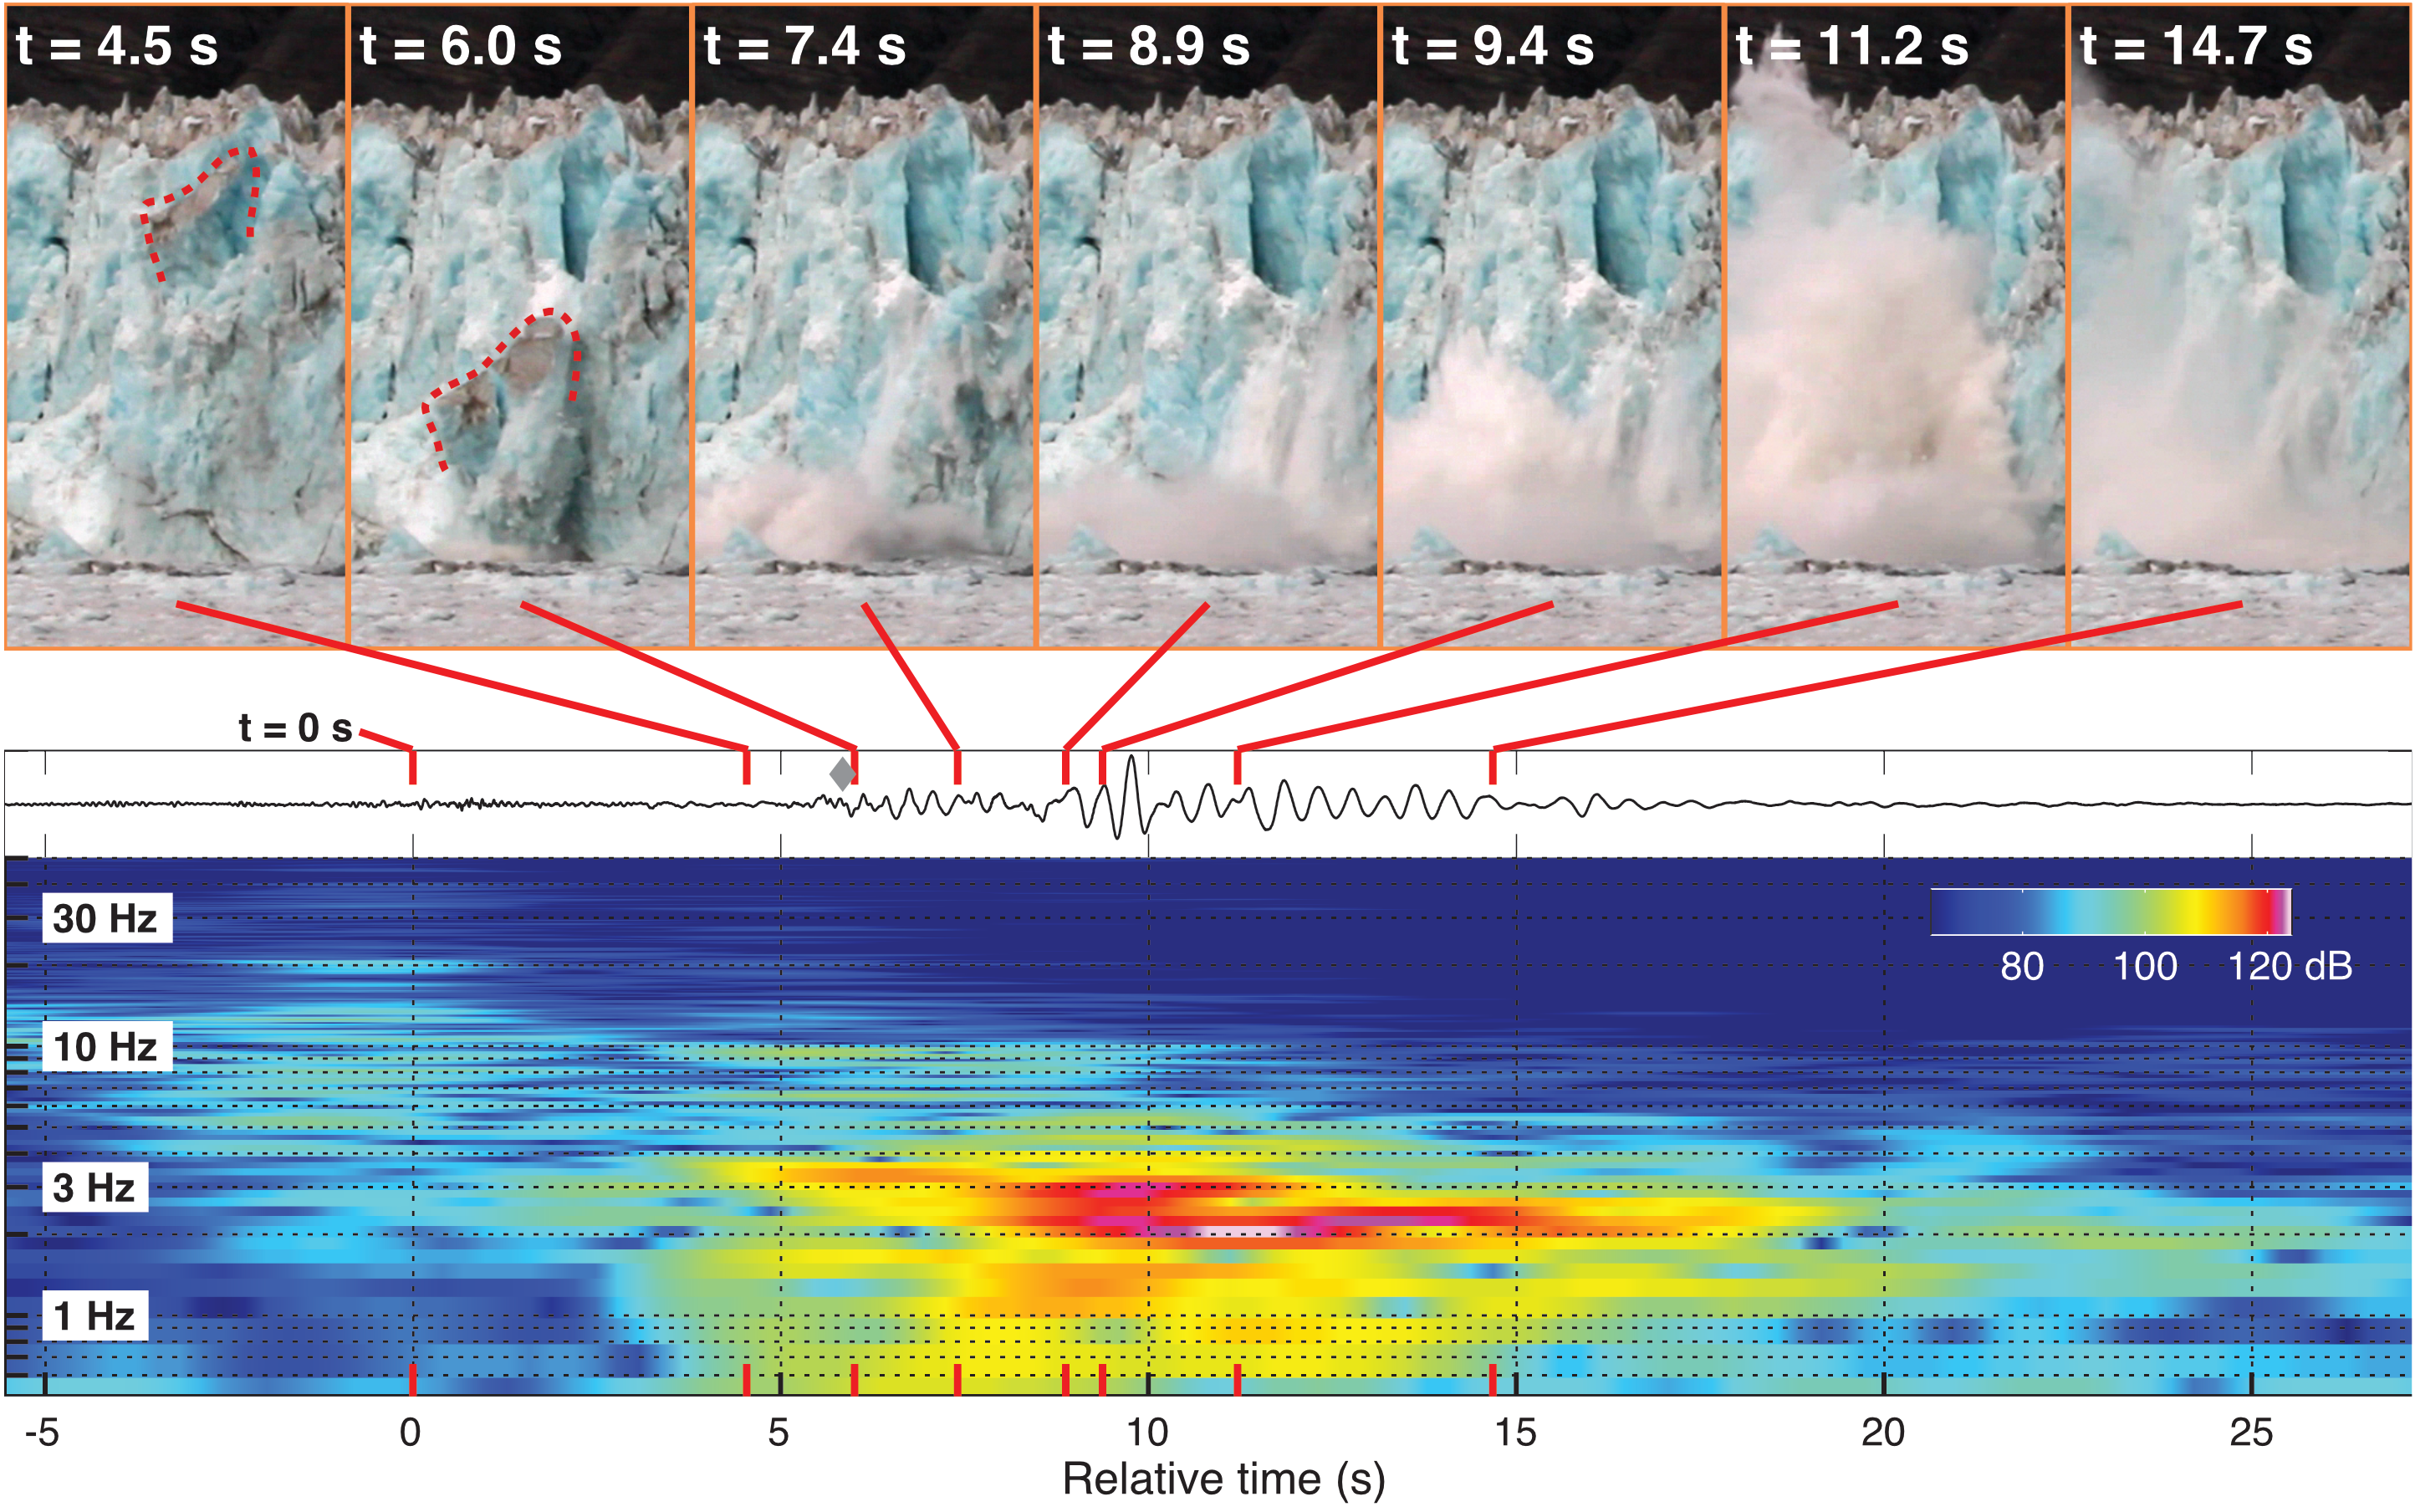 Seismic data is paired to photo stills from a calving event, demonstrating how interactions between icebergs and the sea surface produce icequakes. From Bartholomaus et al 2012, used with permission.